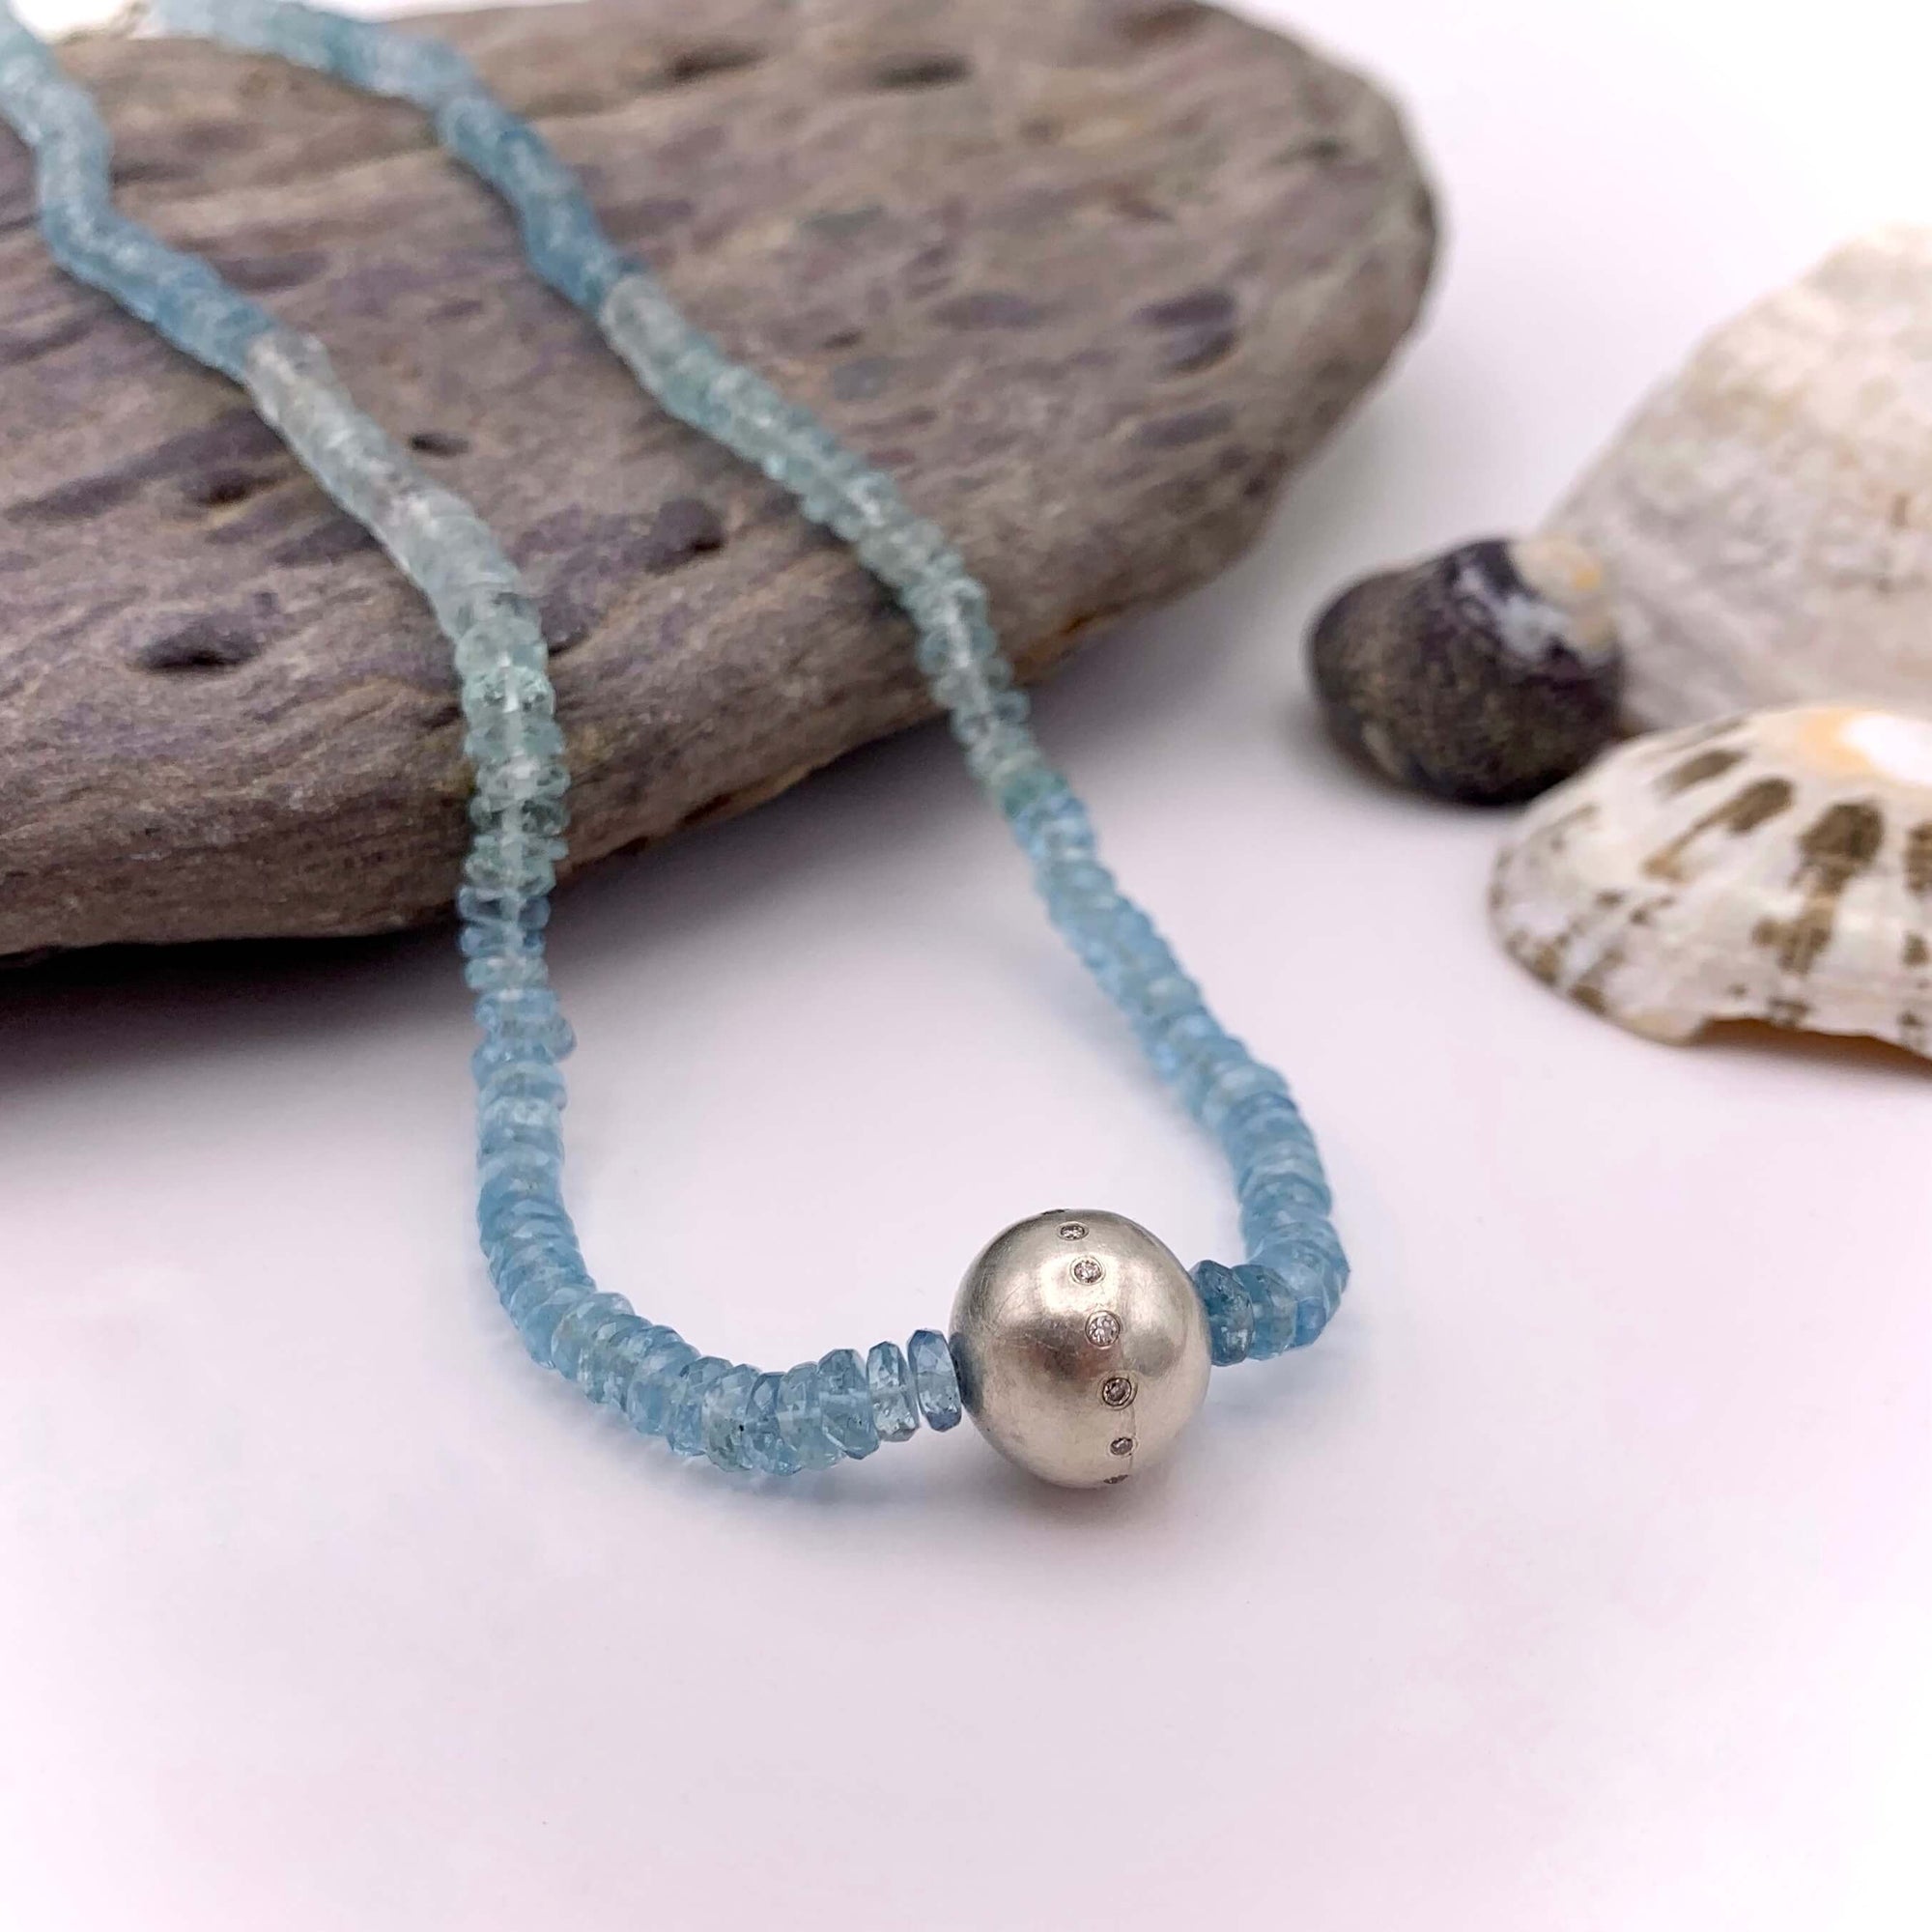 Handmade blue semi precious stones necklace, featuring sterling silver ball embedded with diamonds.